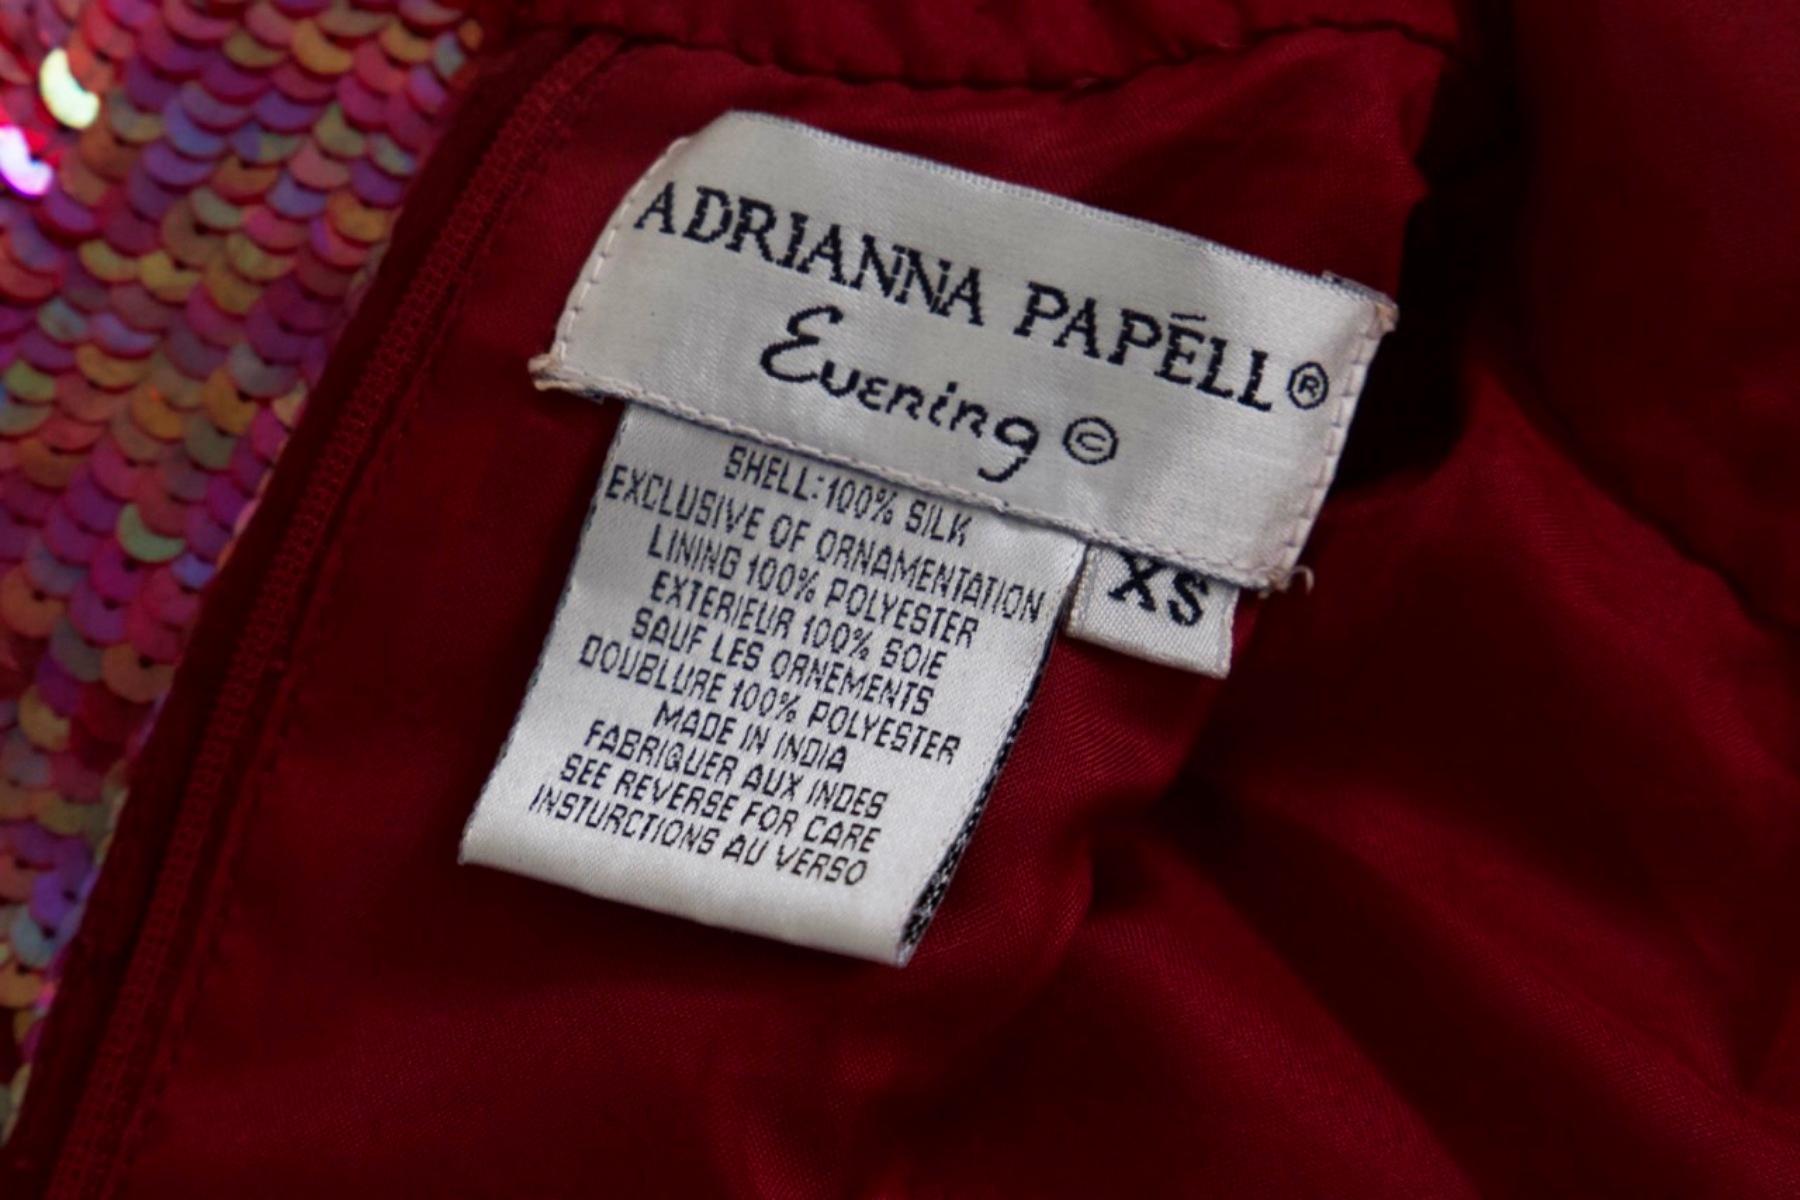 Splendid vintage t-shirt designed by Adriana Papéll in the 1990s. ORIGINAL LABEL.
The T-shirt has a short cut, just above the navel, with short sleeves, totally handmade.
The inner lining is entirely red. The sleeves are short and the collar has a